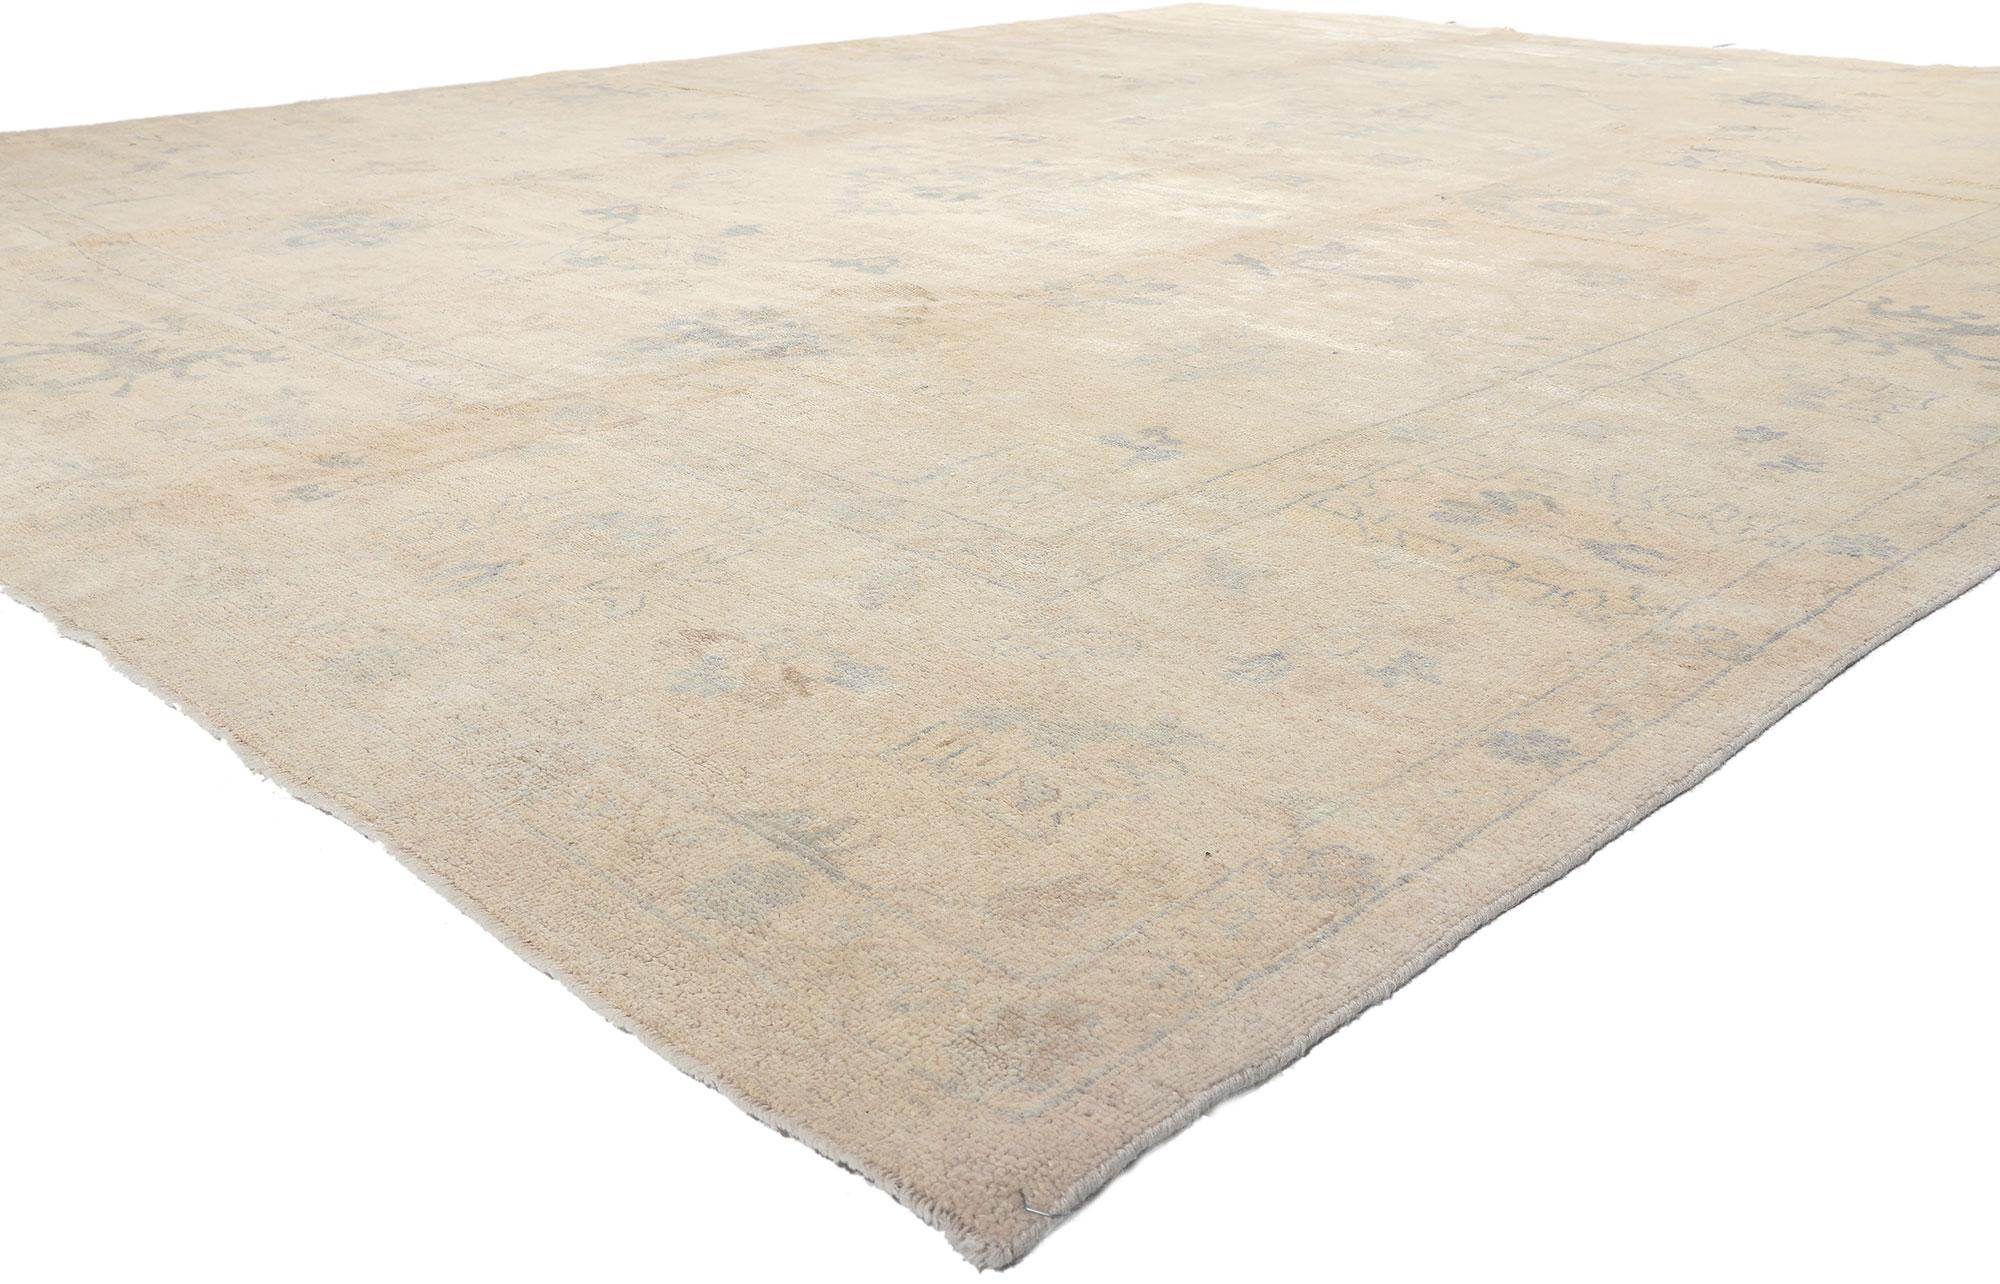 30196 New Vintage-Inspired Oushak Rug with Soft Colors, 11'10 x 14'11.
Blending vintage charm with elements from the modern world, this hand knotted wool modern Oushak area rug beautifully balances new and old. The faded botanical design and soft